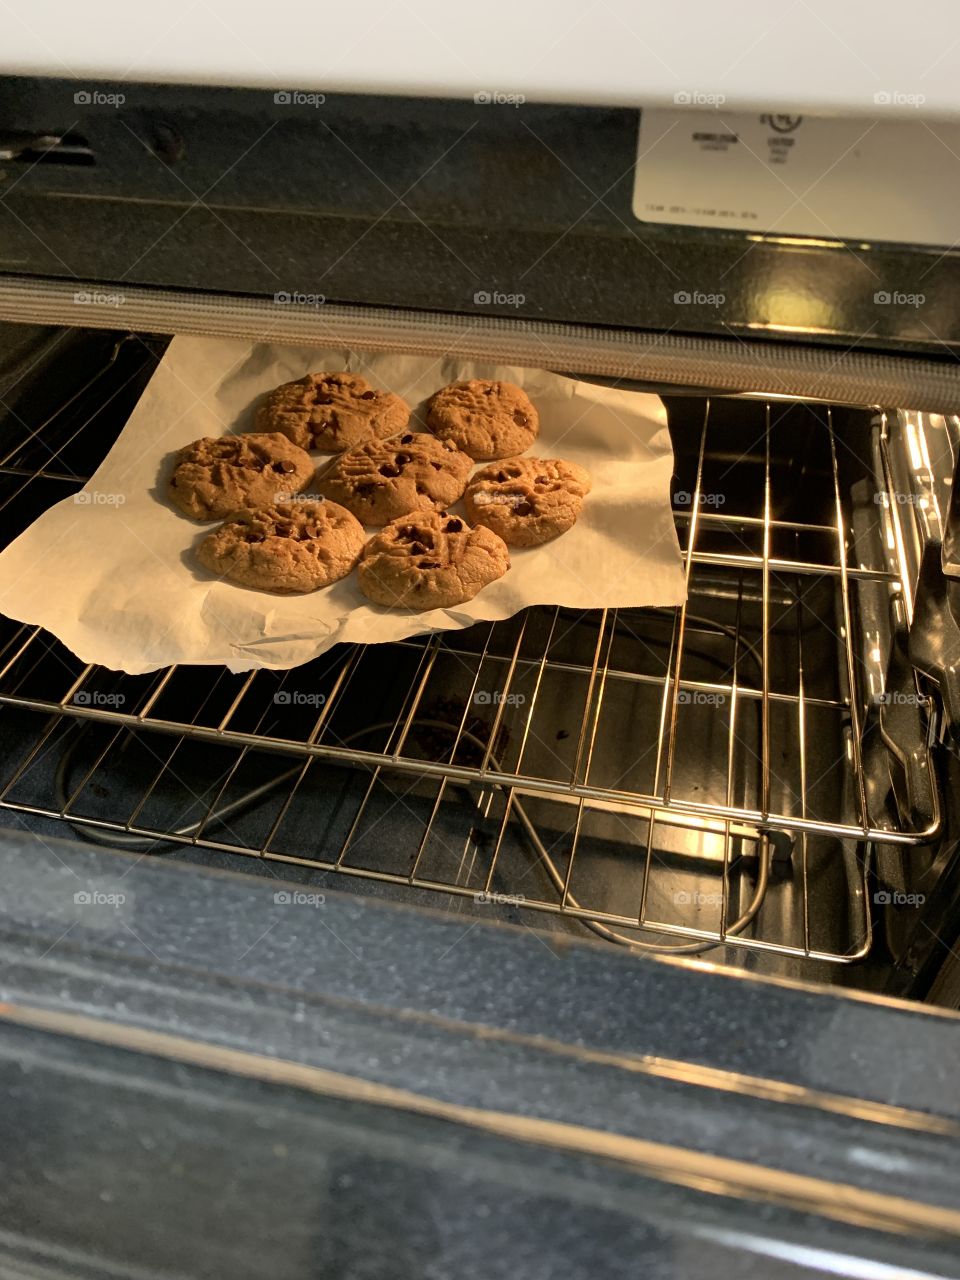 Baking cookies on a hot day is a good idea?